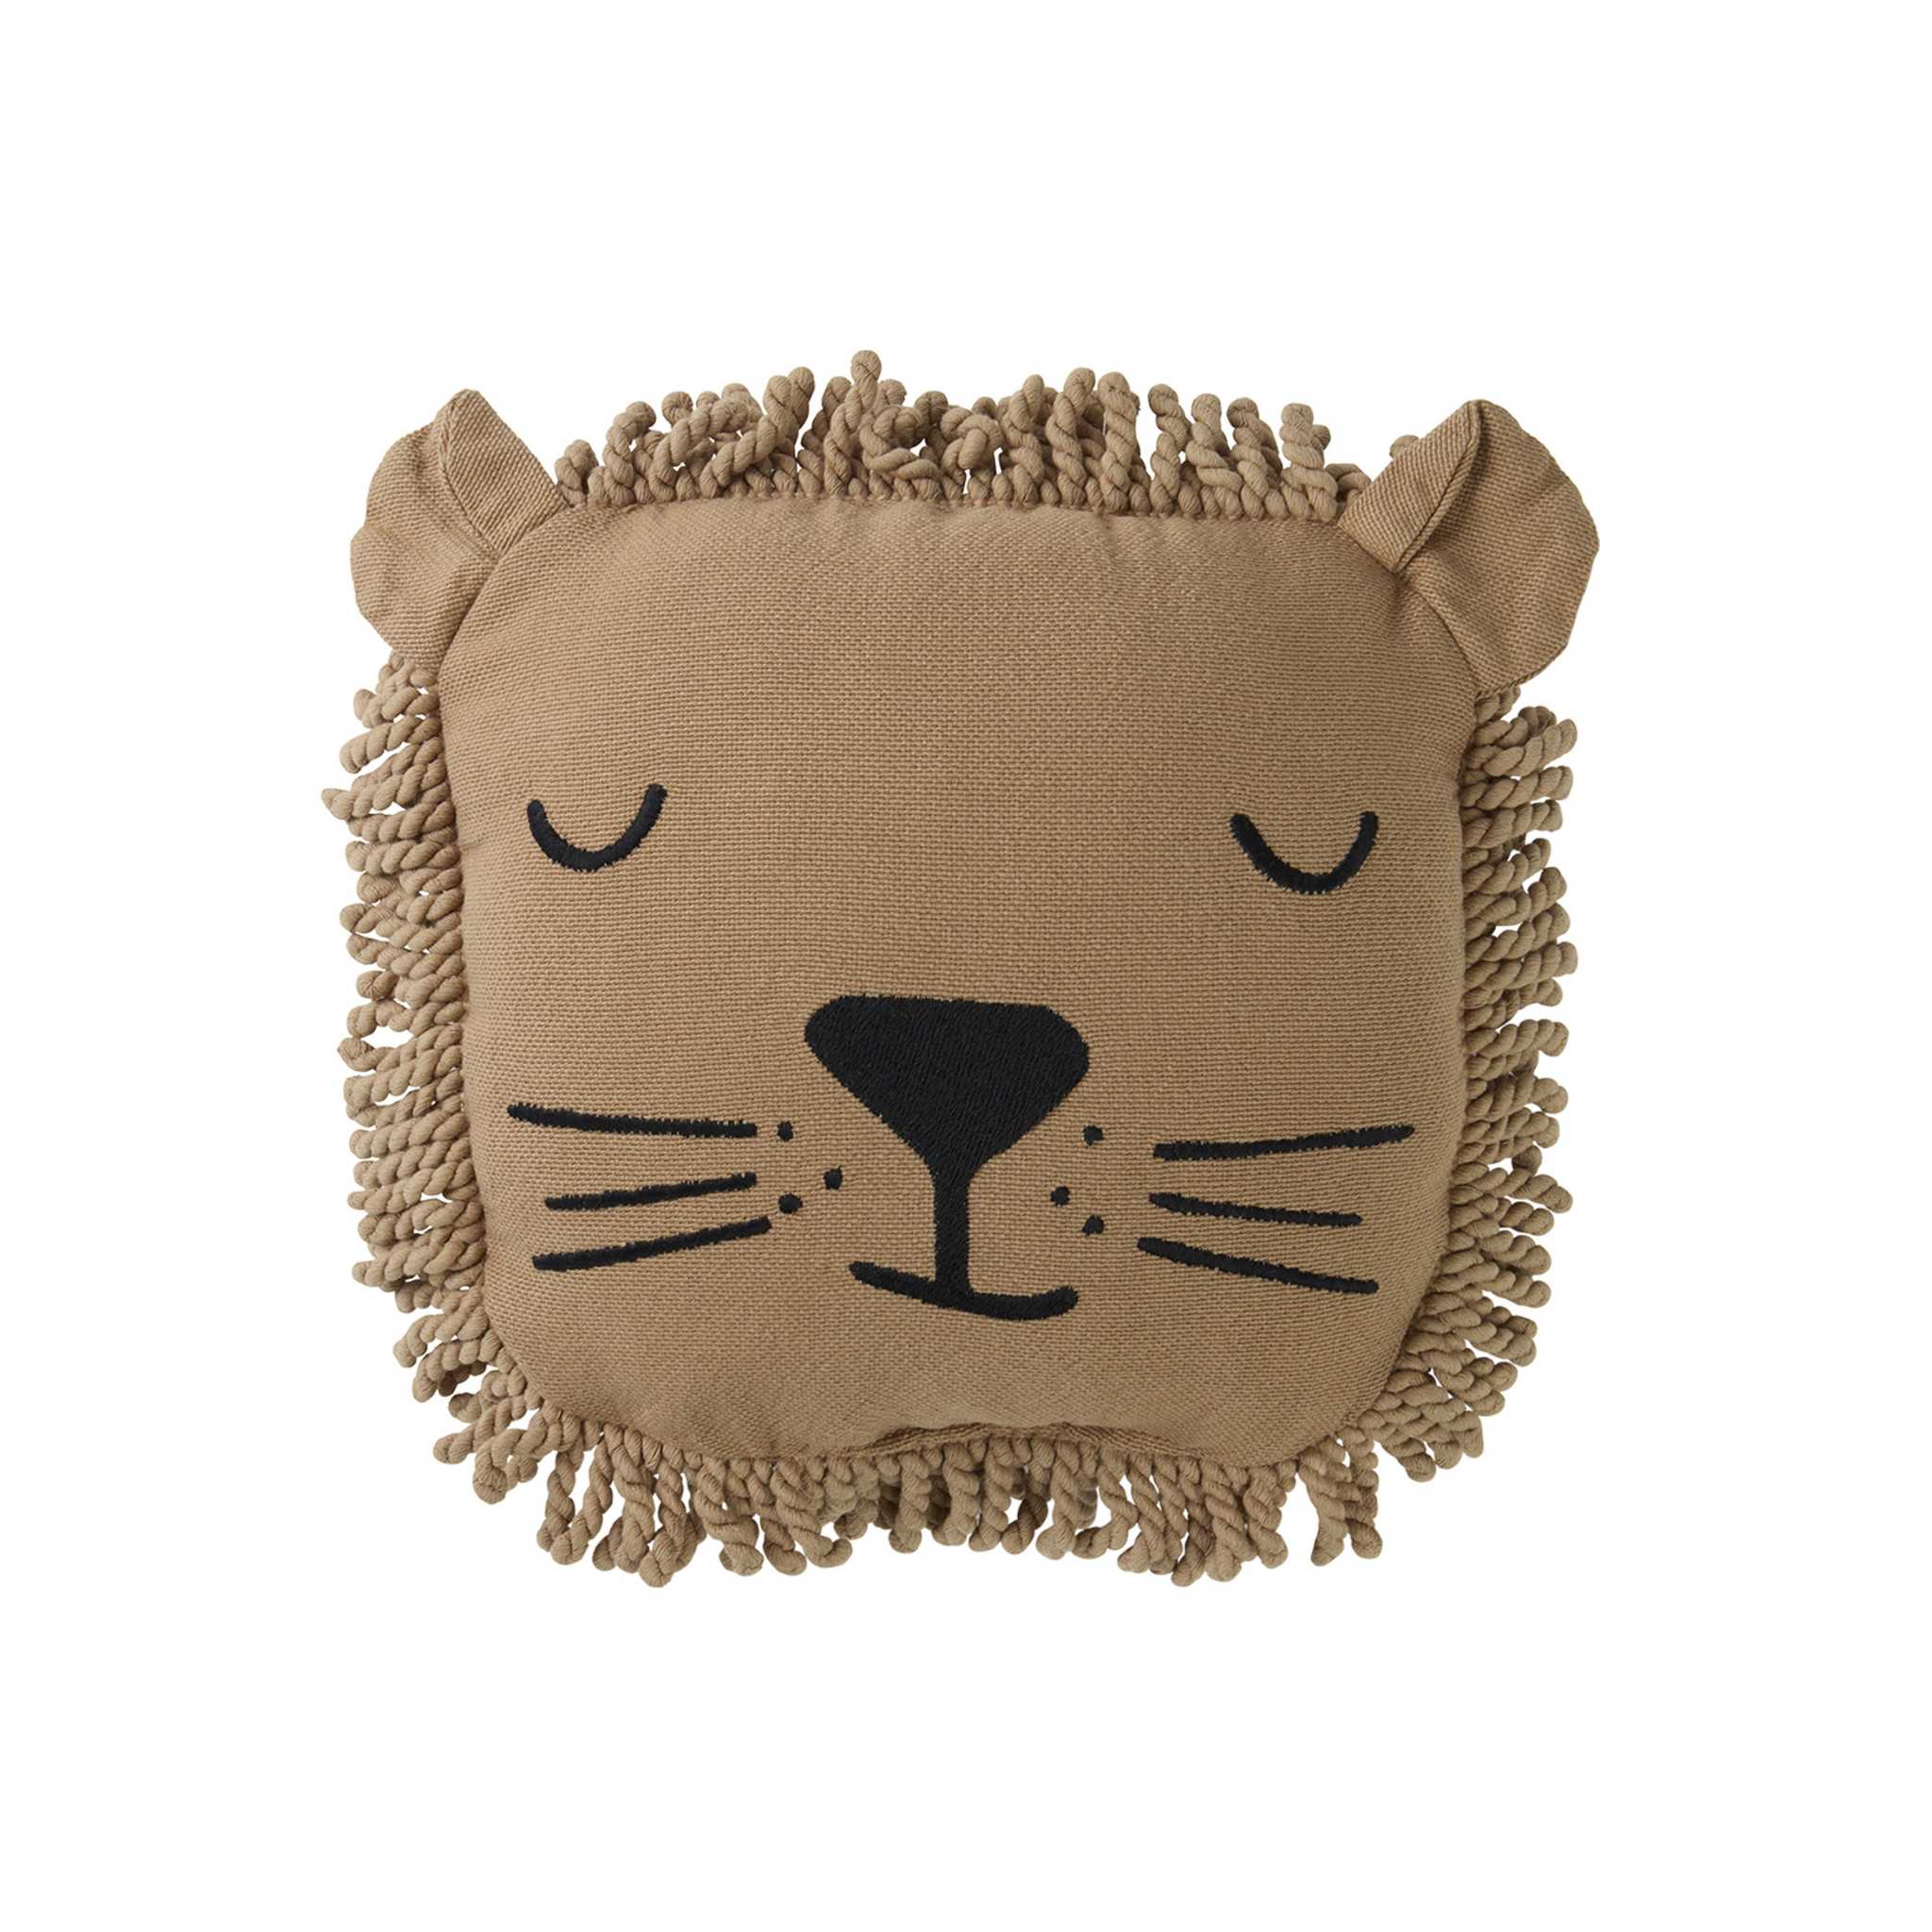 Nobodinoz Lion Face Embroidery Cushion - Natural 